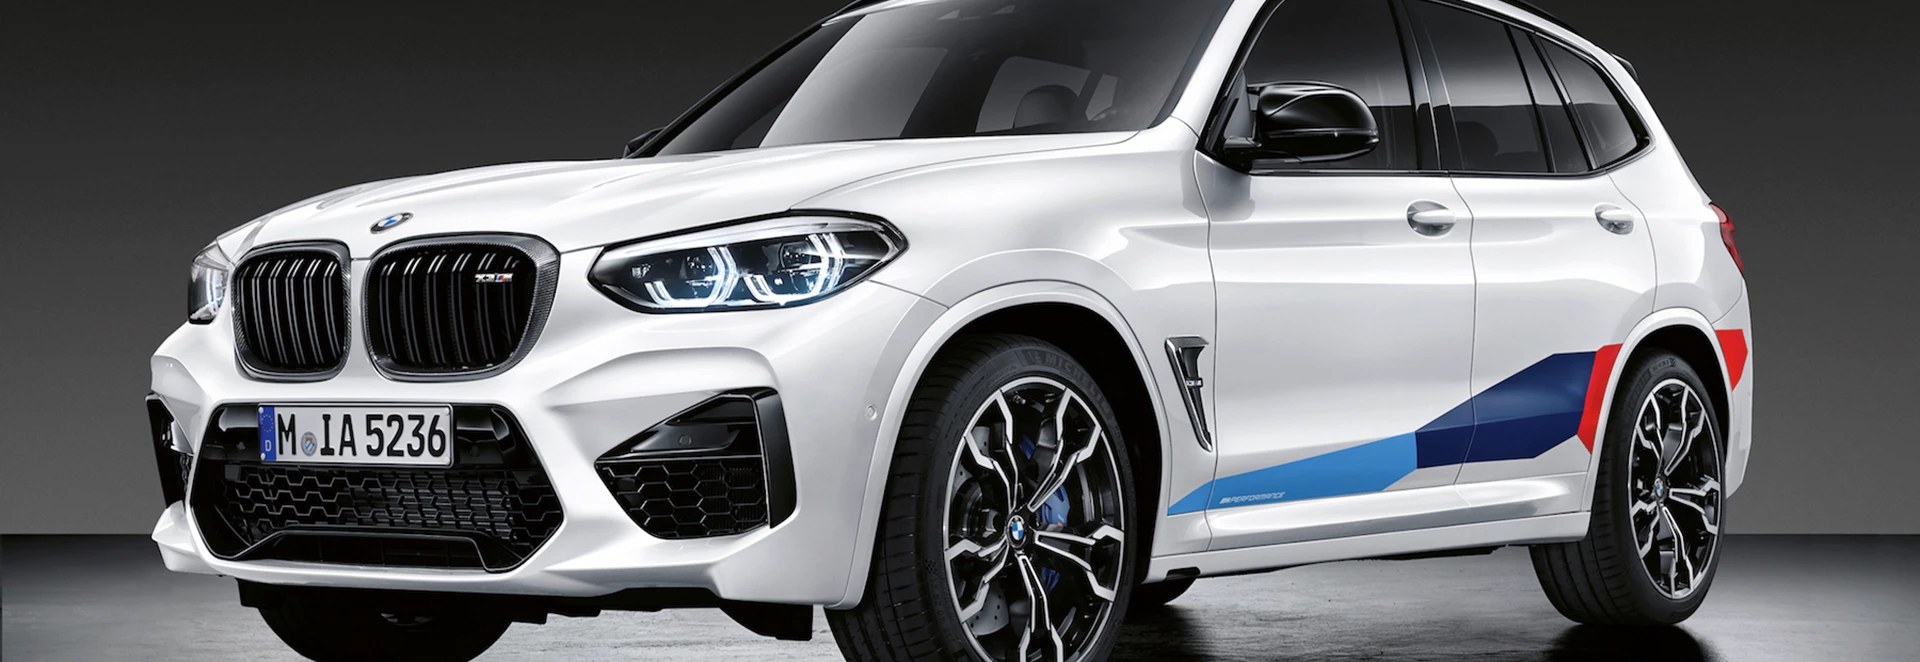 BMW brings racier look to X3 M and X4 M with Performance Parts catalogue